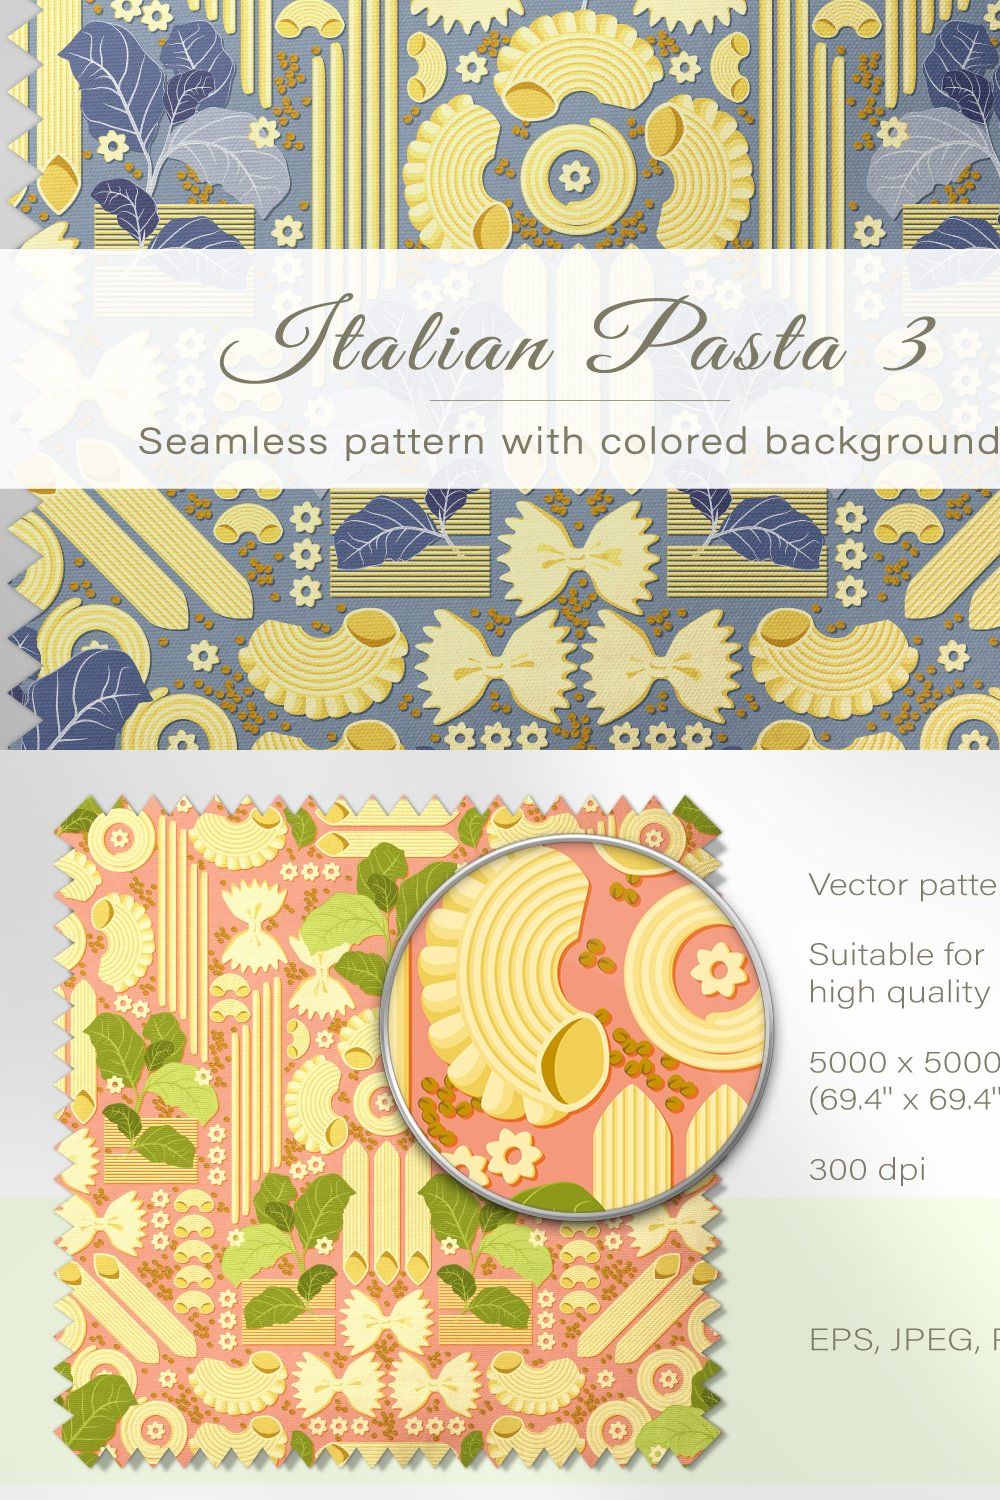 Seamless pattern of Italian pasta 3 pinterest preview image.